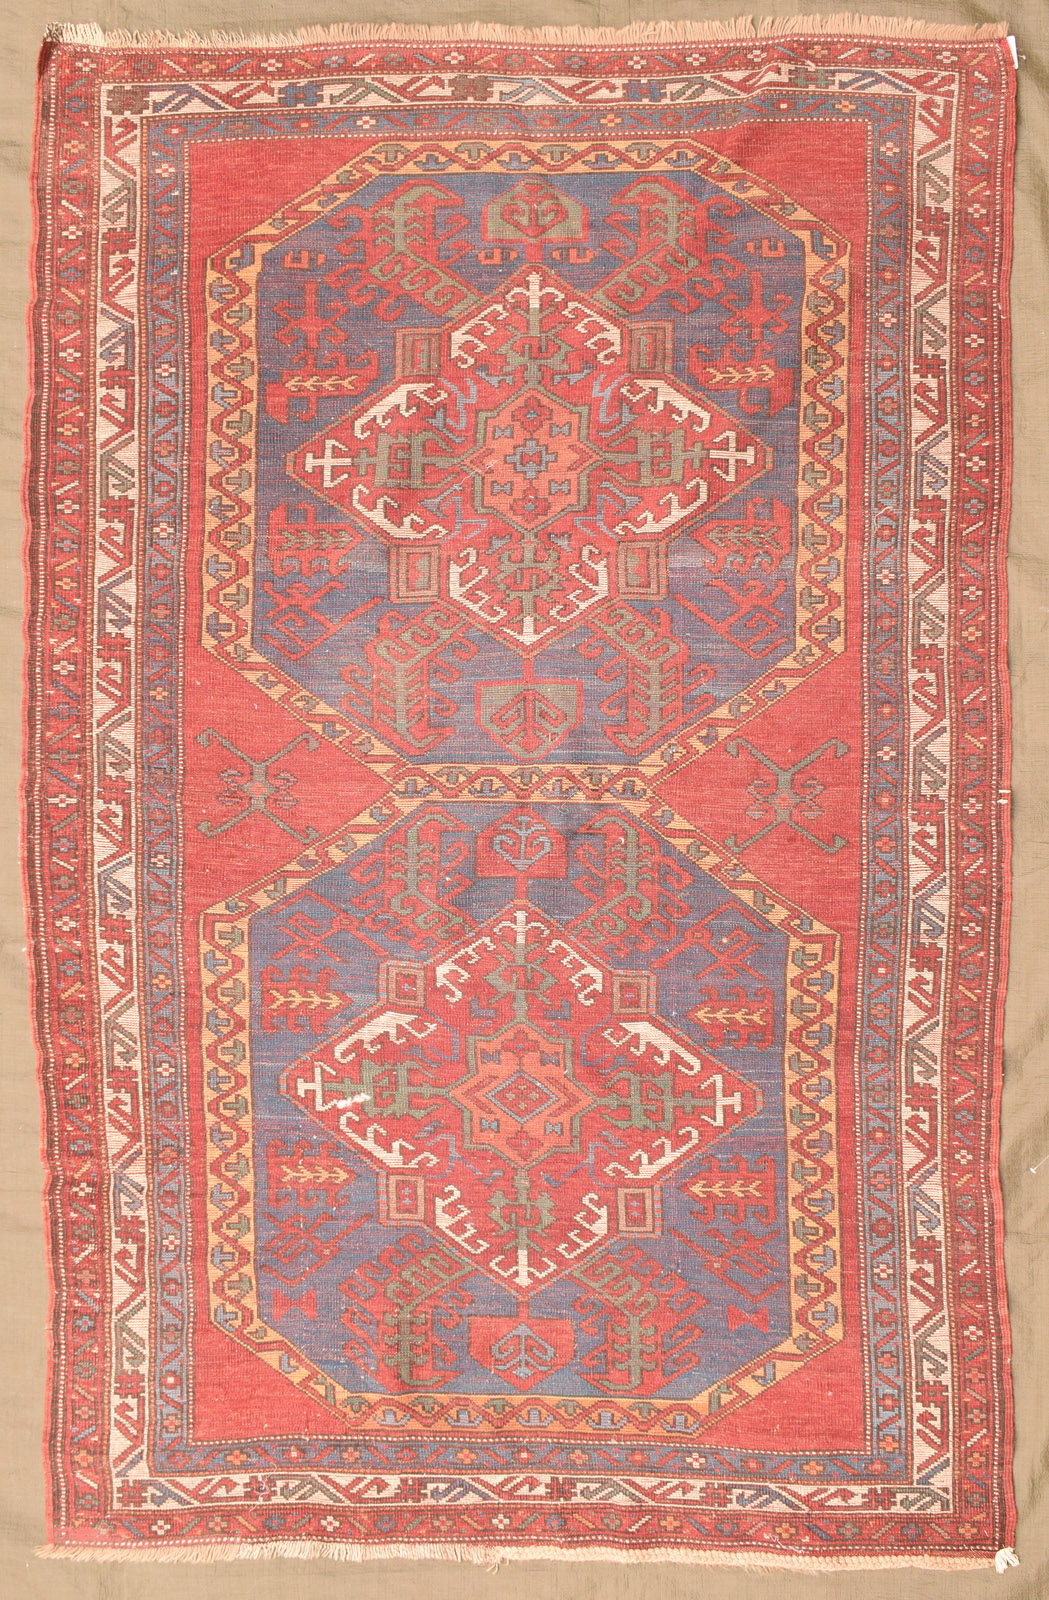 TWO SEMI-ANTIQUE VILLAGE RUGS - Image 12 of 12